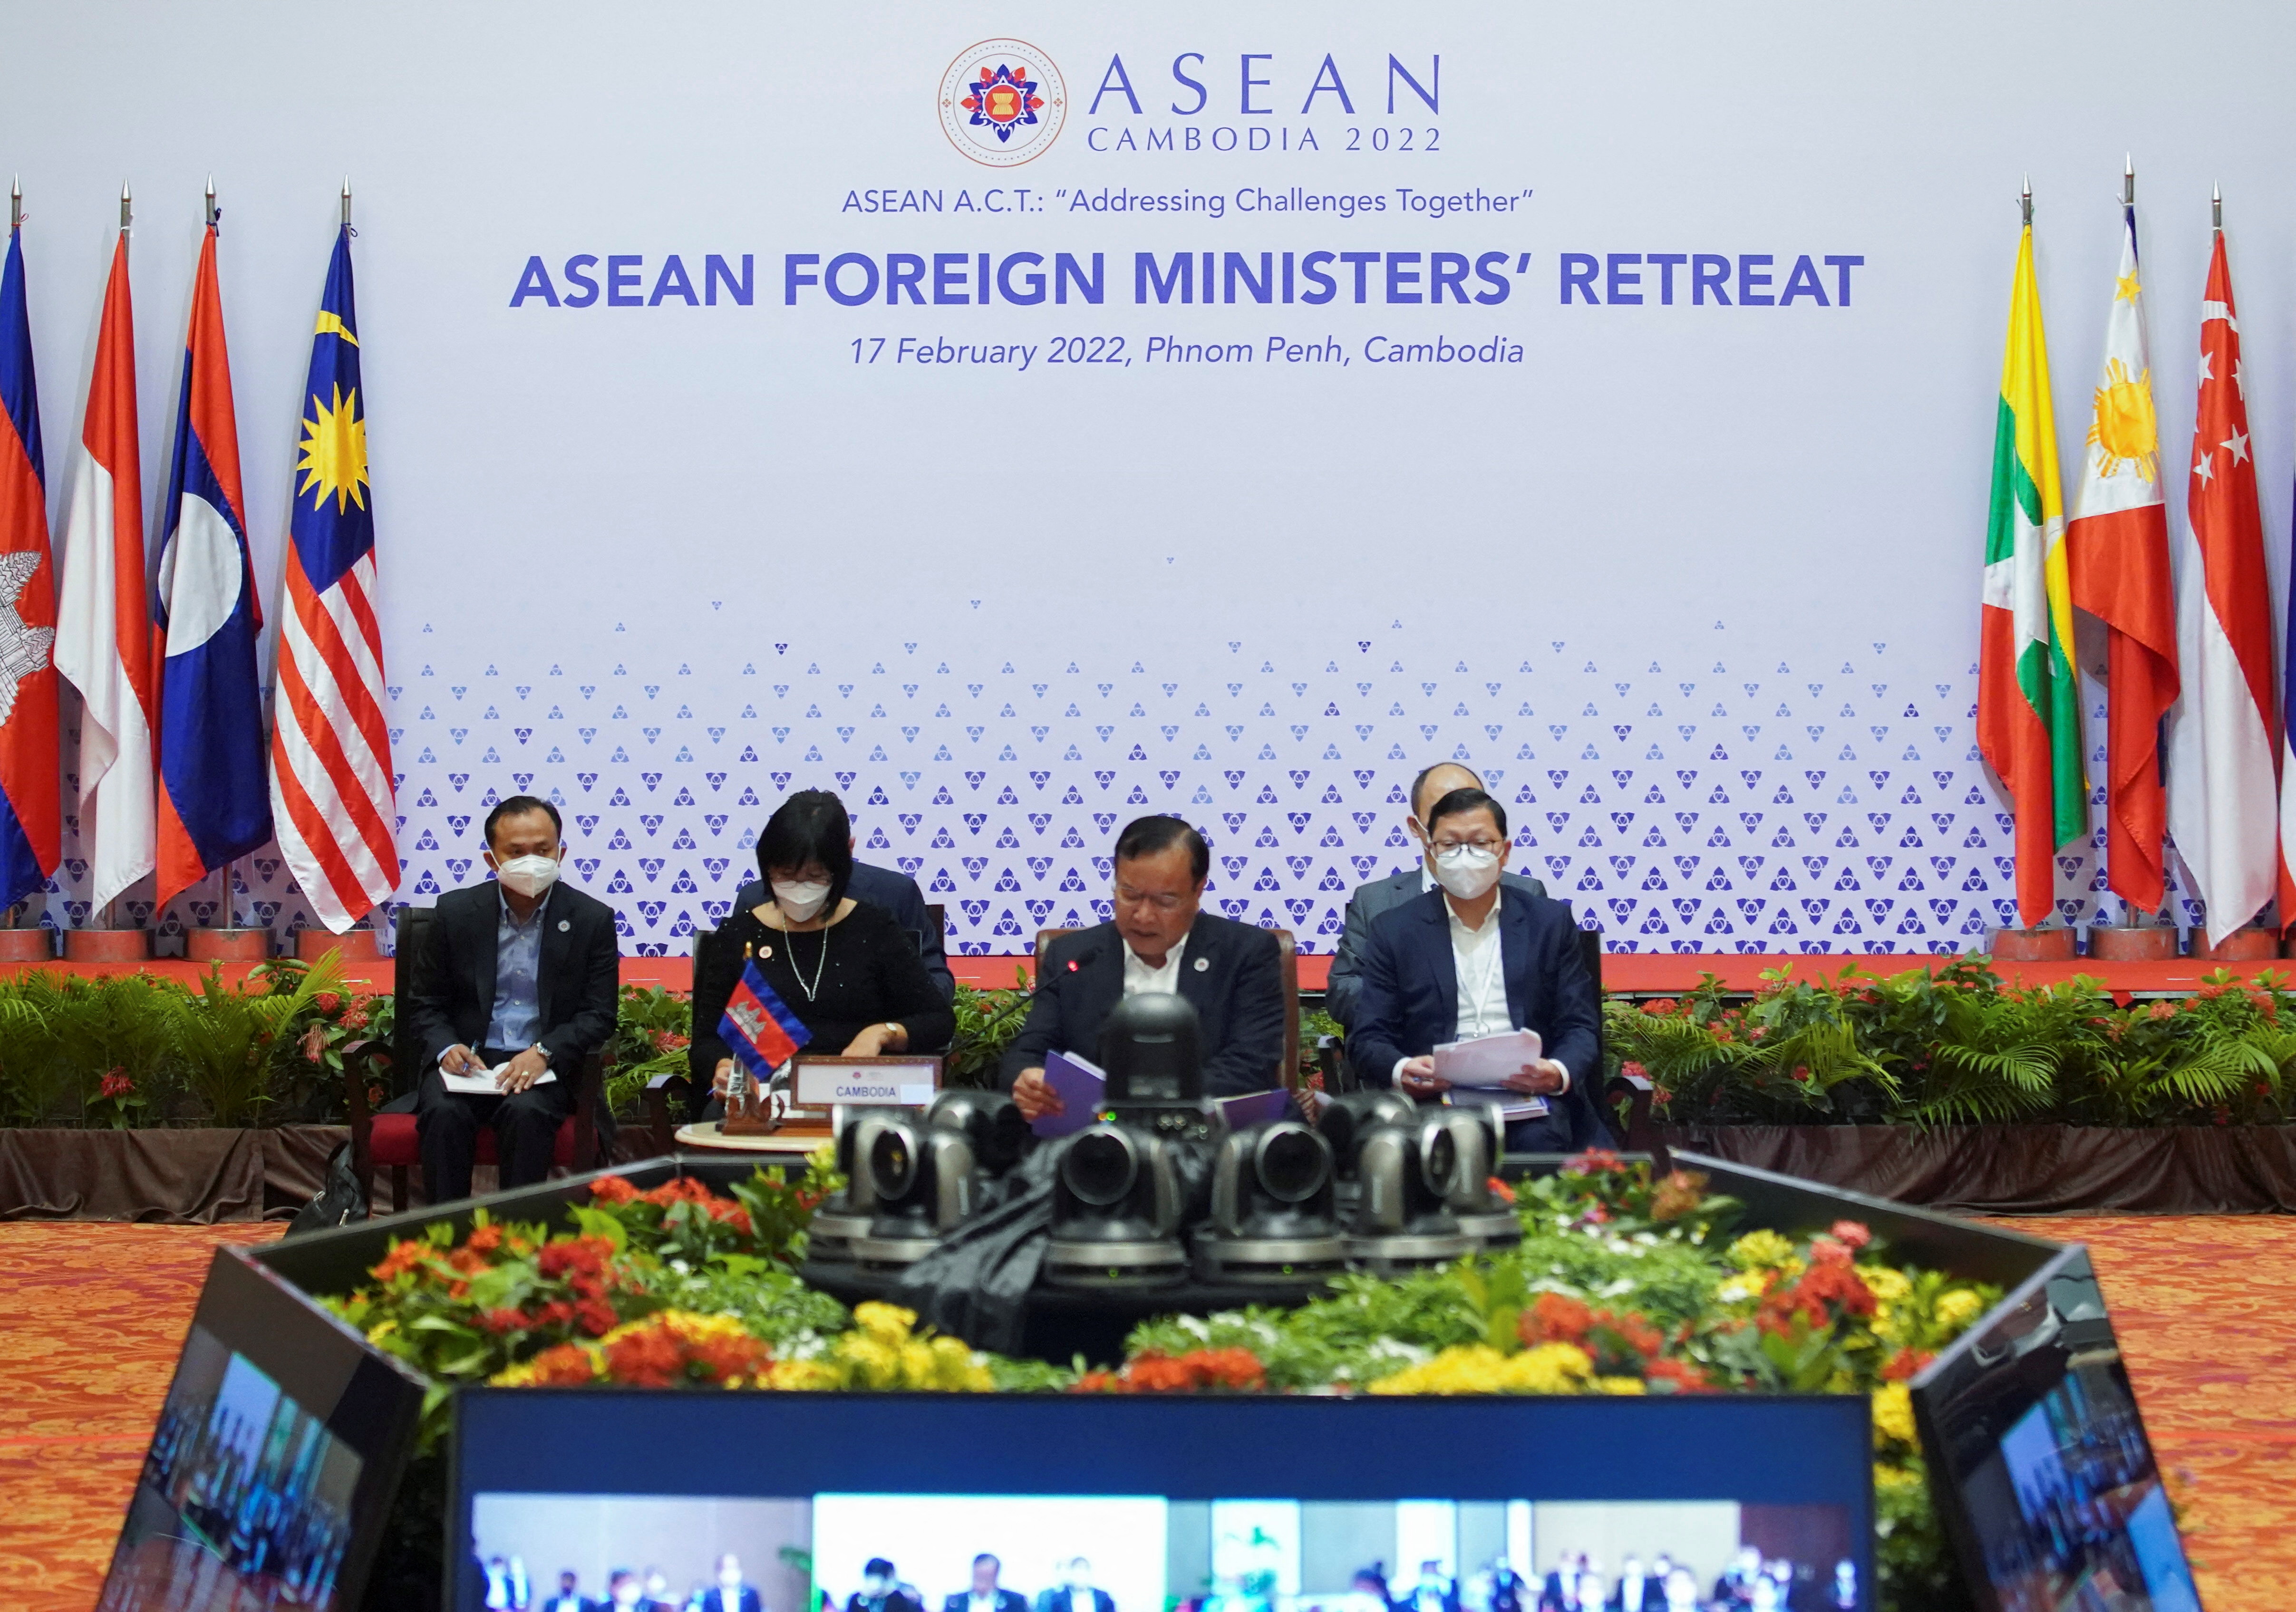 ASEAN foreign ministers meet in Cambodia, Myanmar crisis in focus